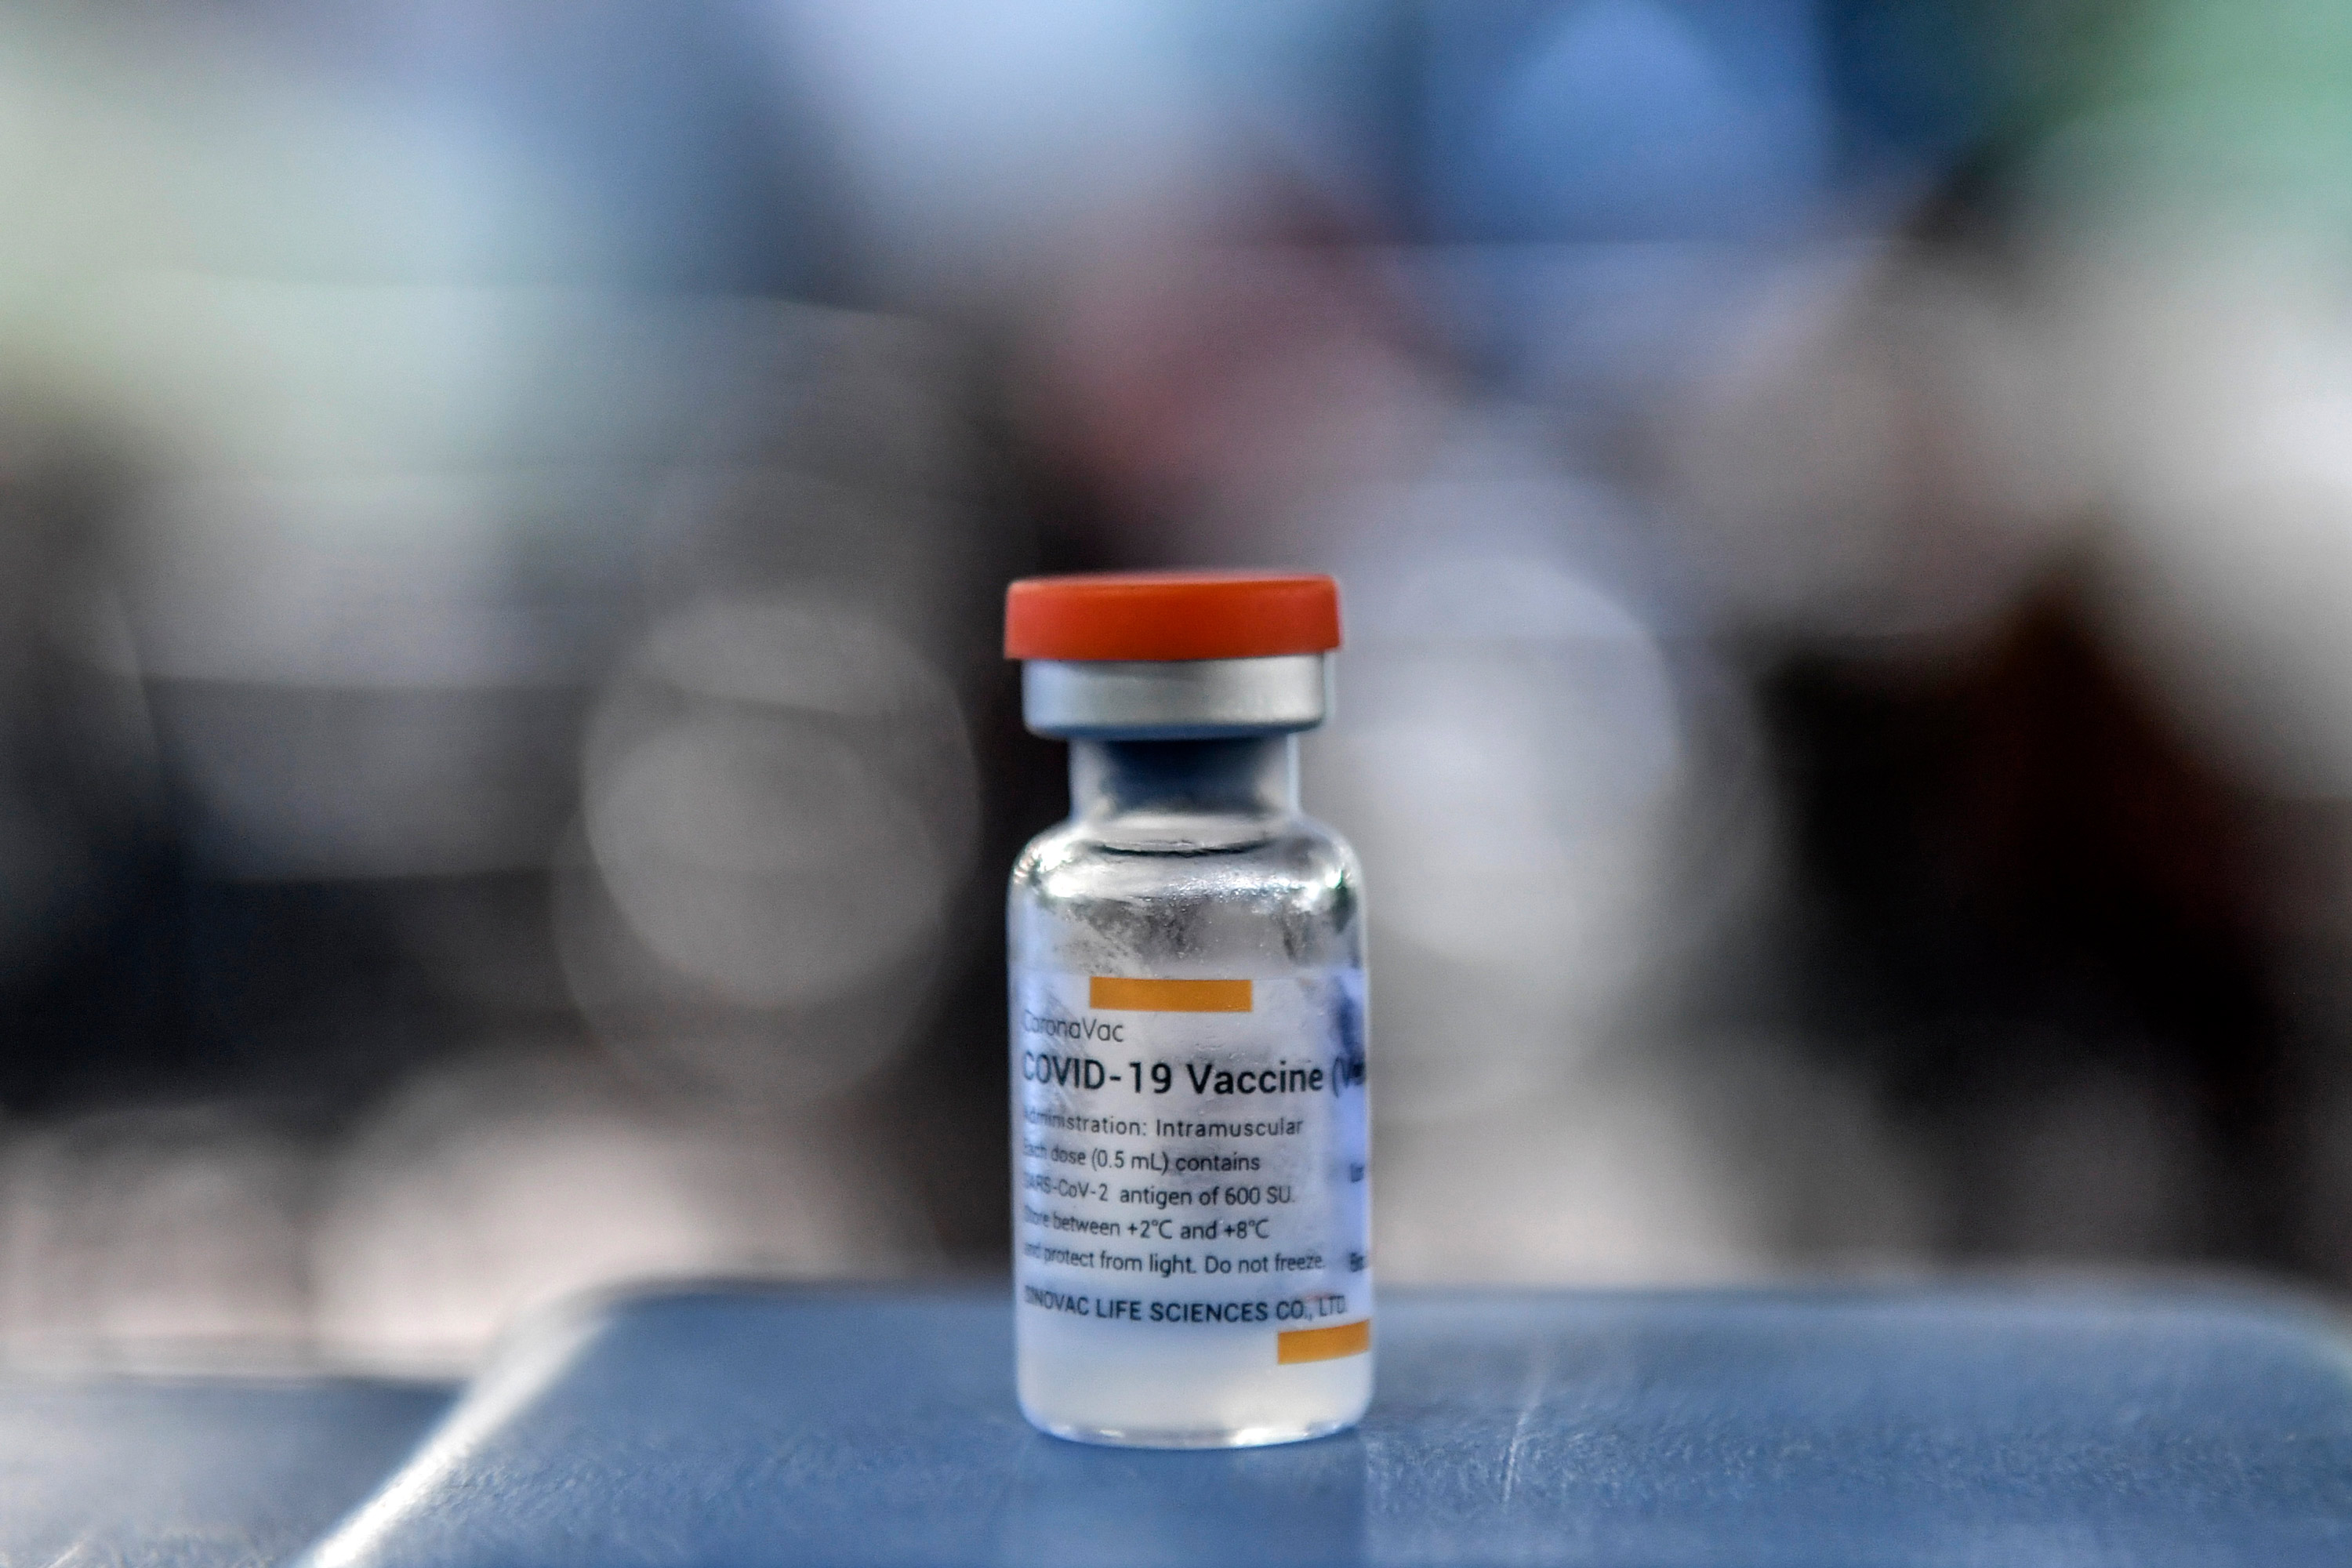 A vial of the Sinovac vaccine against COVID-19 is pictured at the Habitat nursing home in Medellin, Colombia, on February 26.